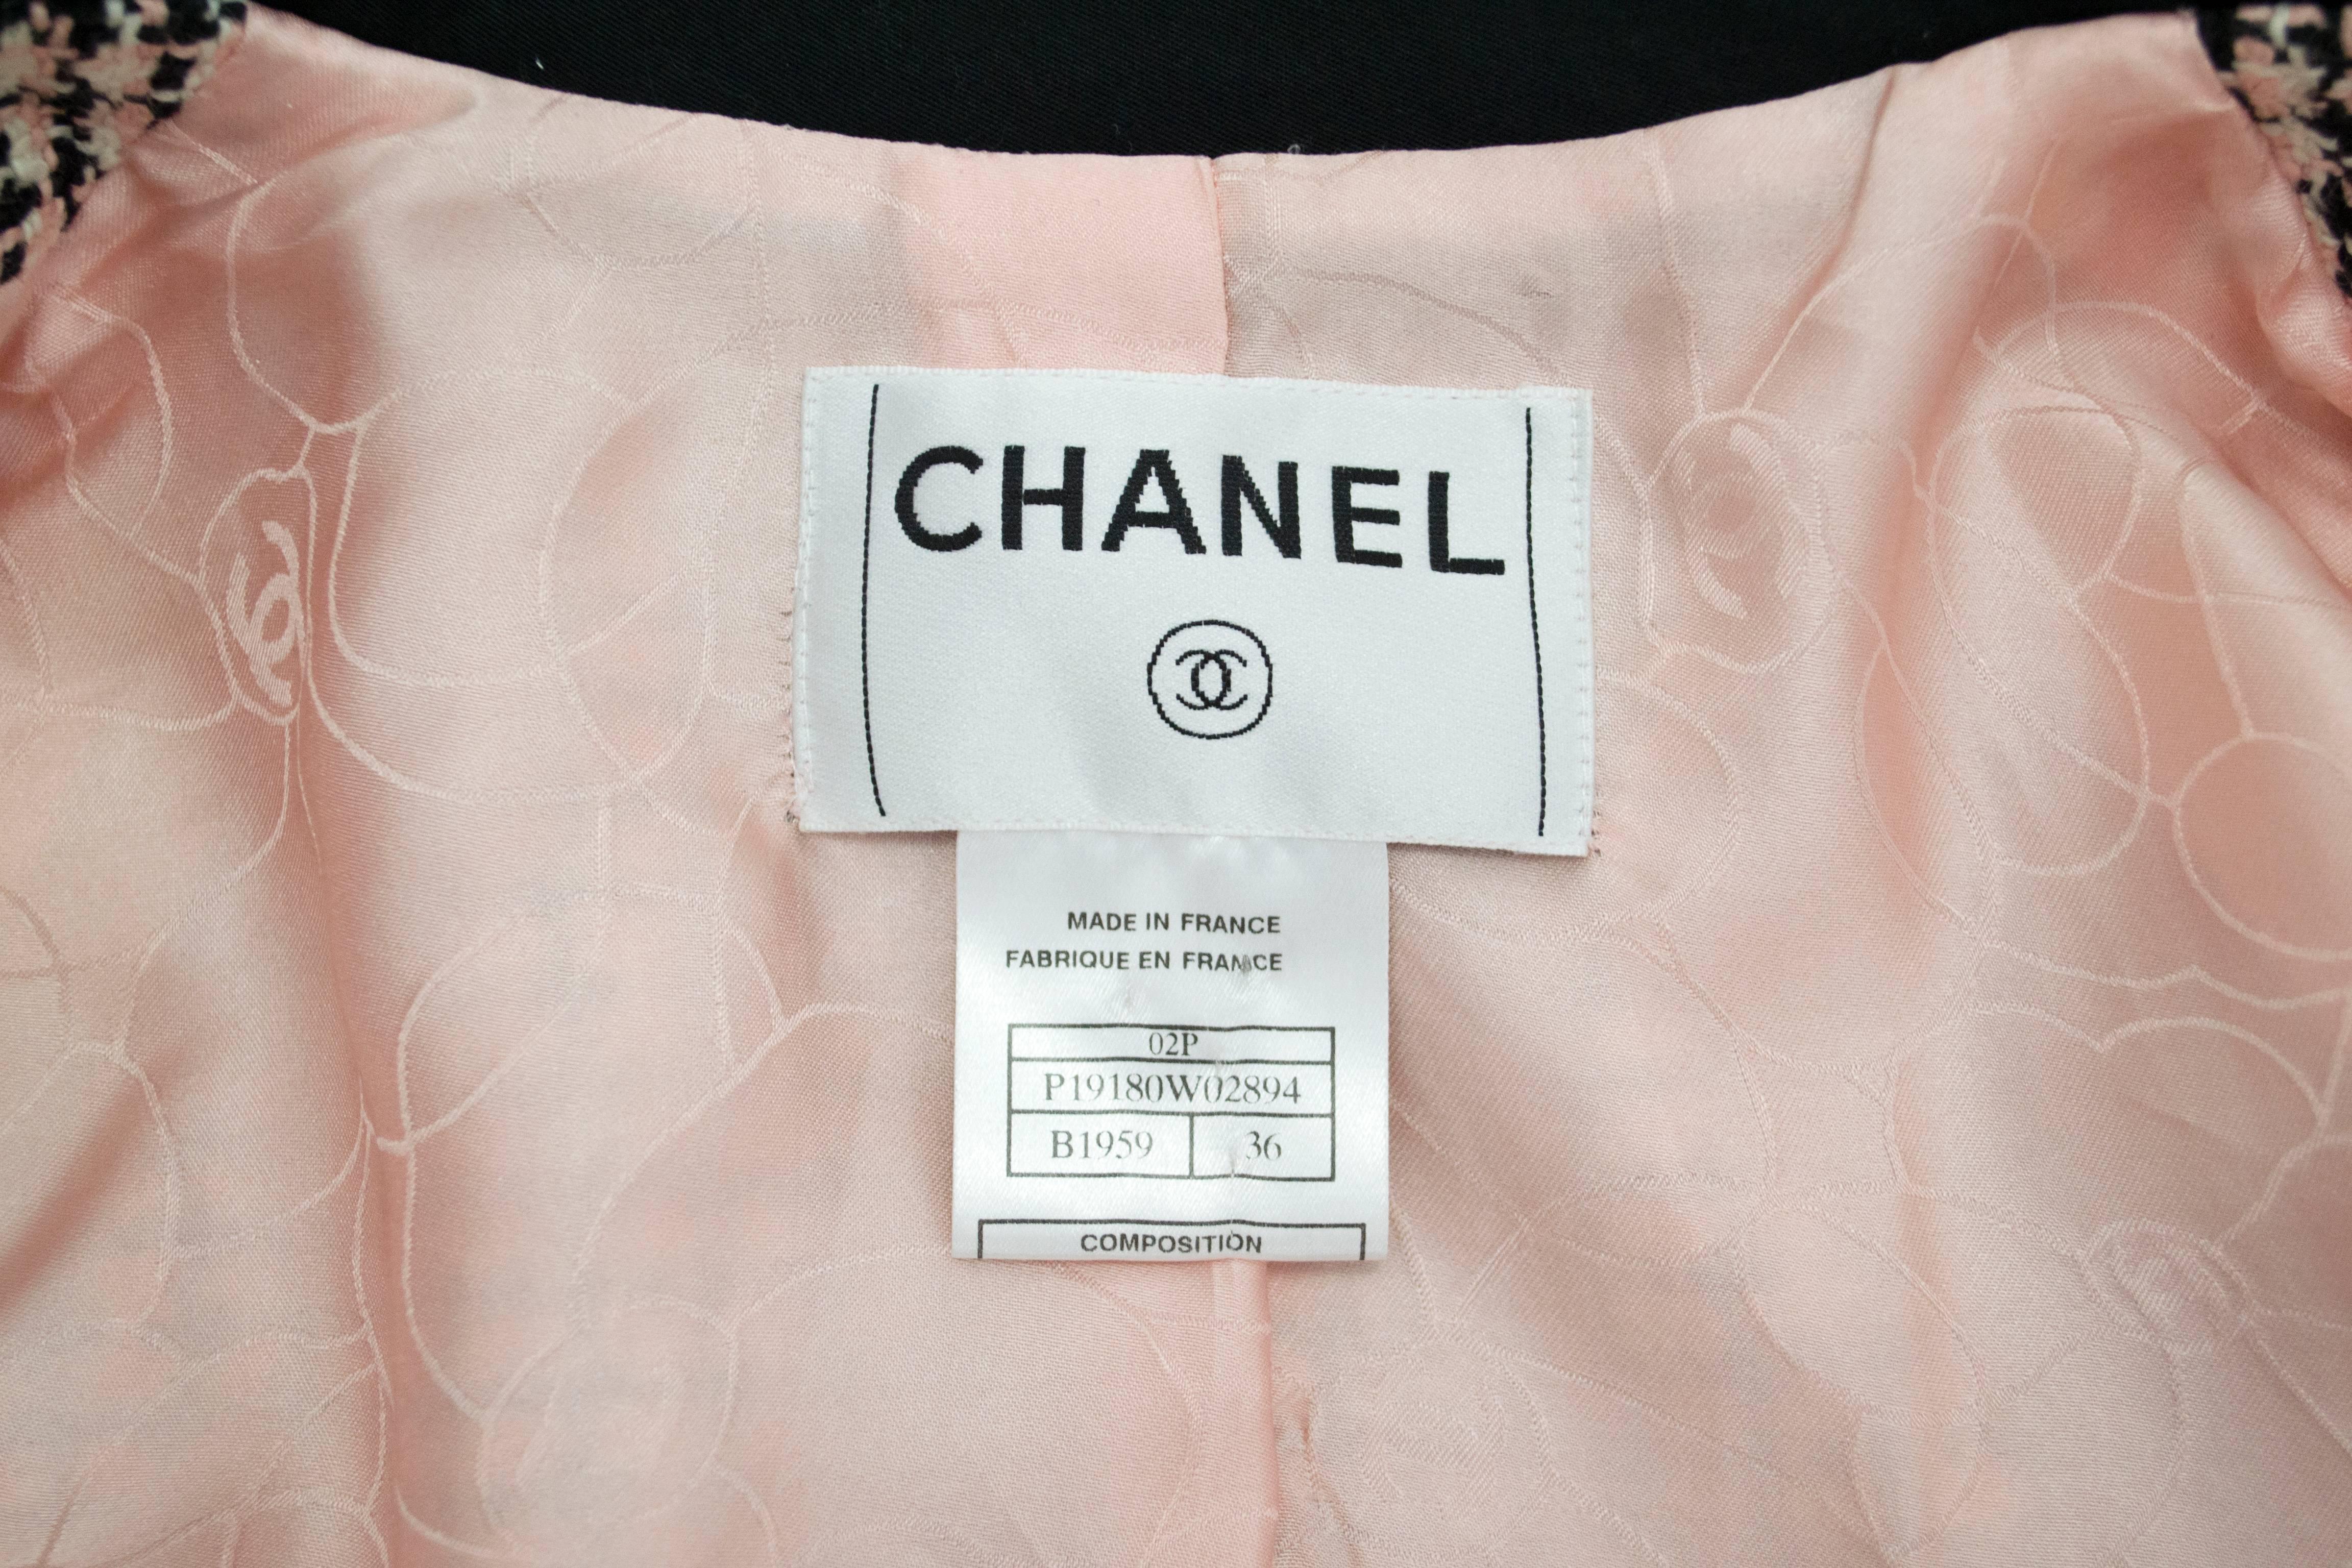 Chanel 2002 Collection. This is a 100% cotton heavier weight jacket, fully lined in silk with signature CC logo. 2 button on front face with 3 buttons at each cuff. Collar is black silk. Very good condition with minor wear due to age. 